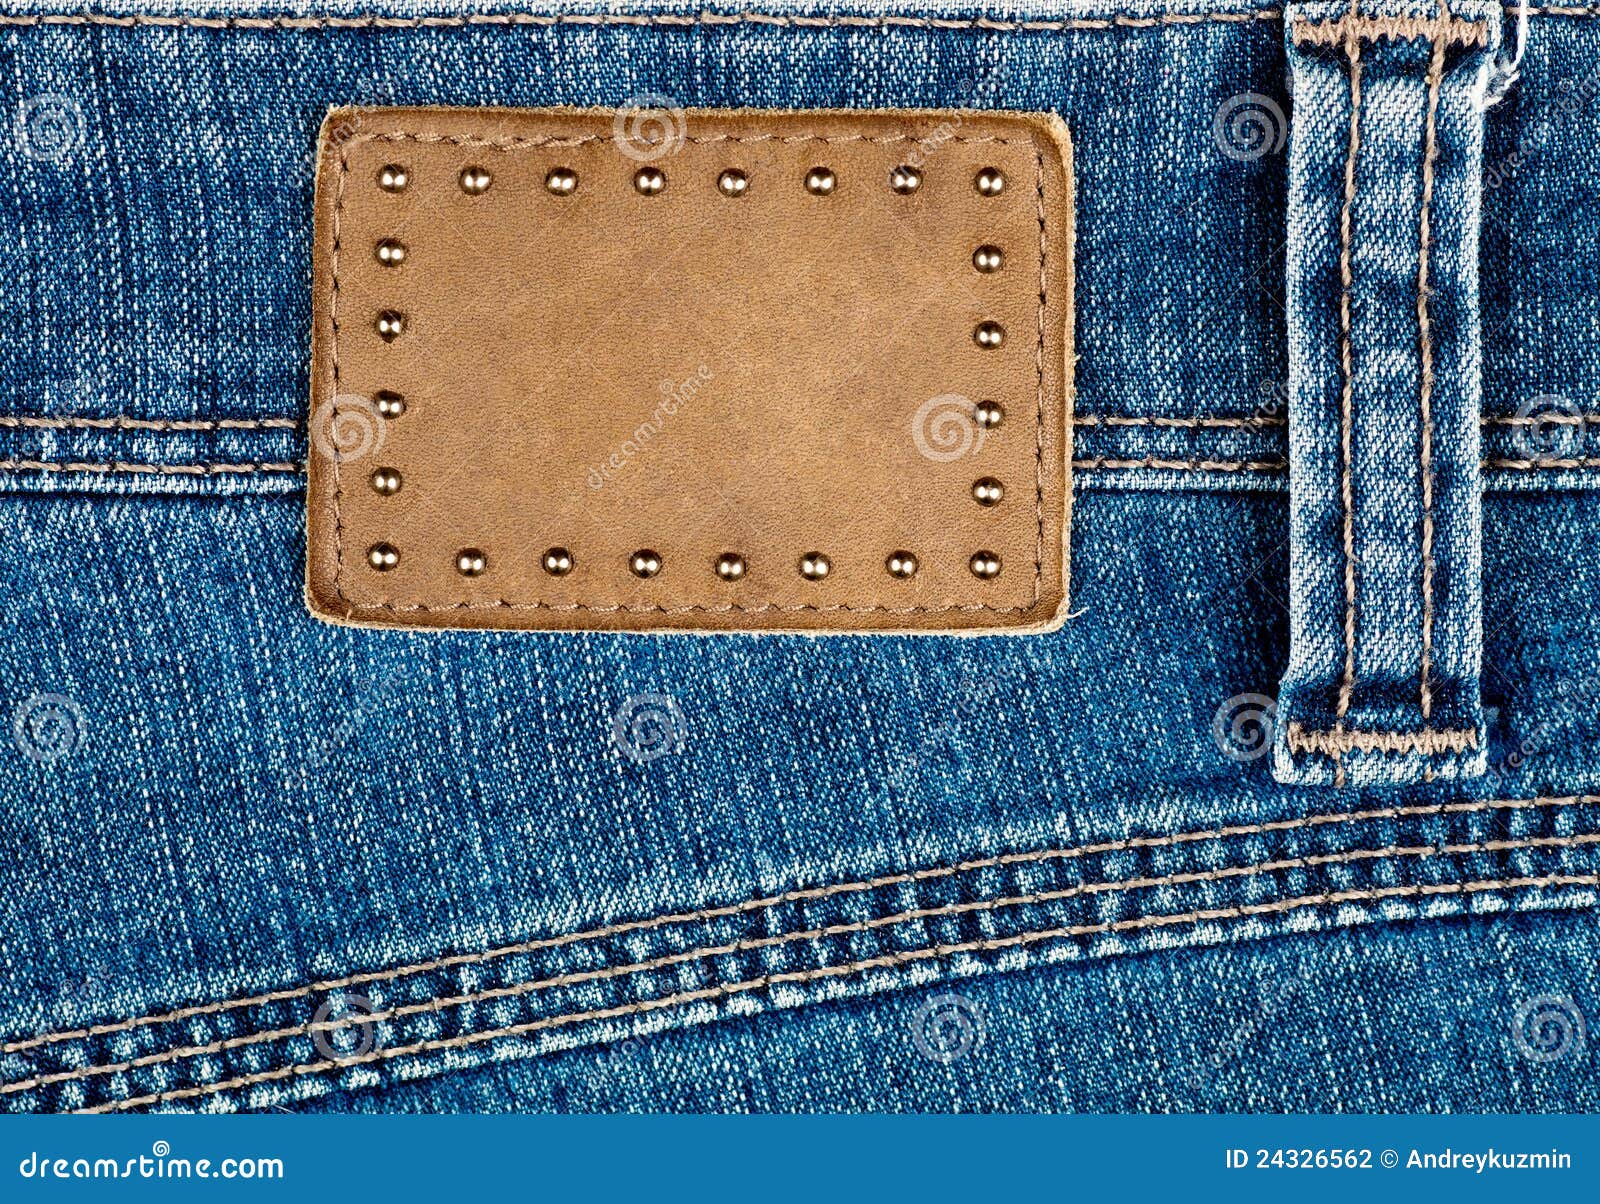 Blank Leather Jeans Label Decorated by Rivets Stock Photo - Image of ...